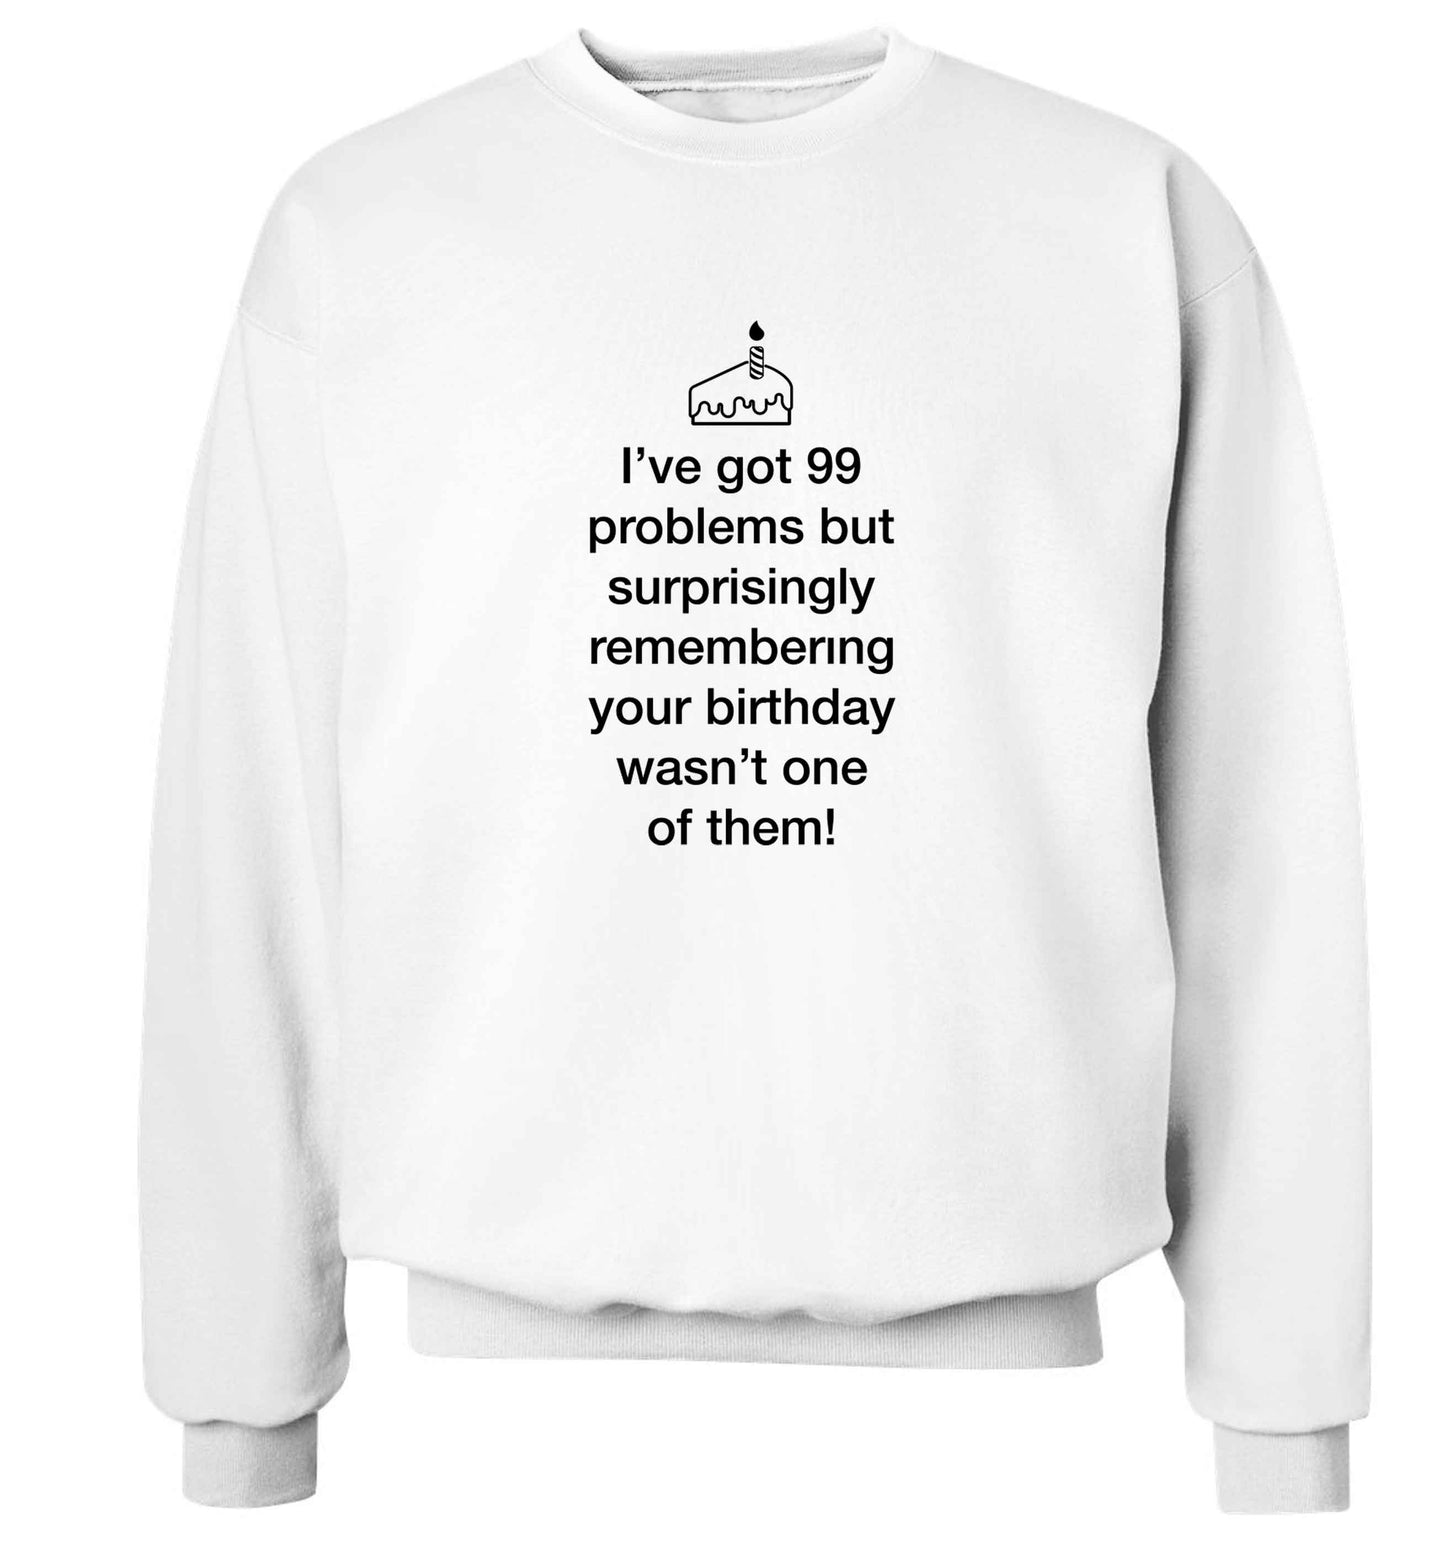 I've got 99 problems but surprisingly remembering your birthday wasn't one of them! adult's unisex white sweater 2XL